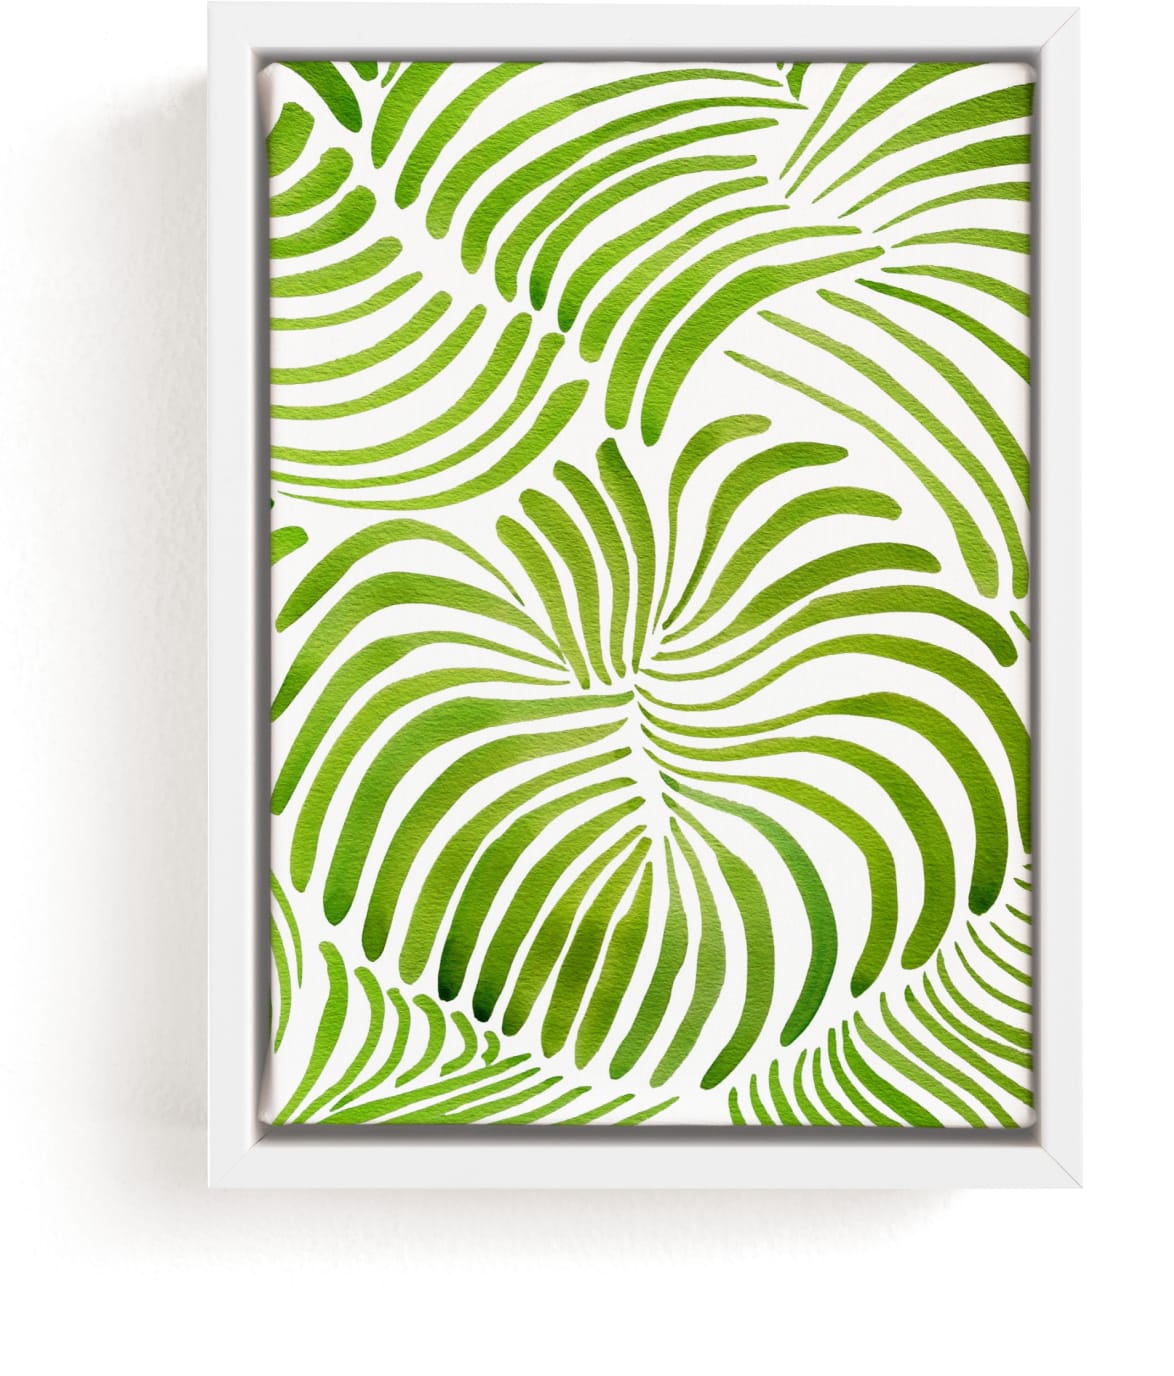 This is a green art by Deborah Velasquez called Minted Forest.